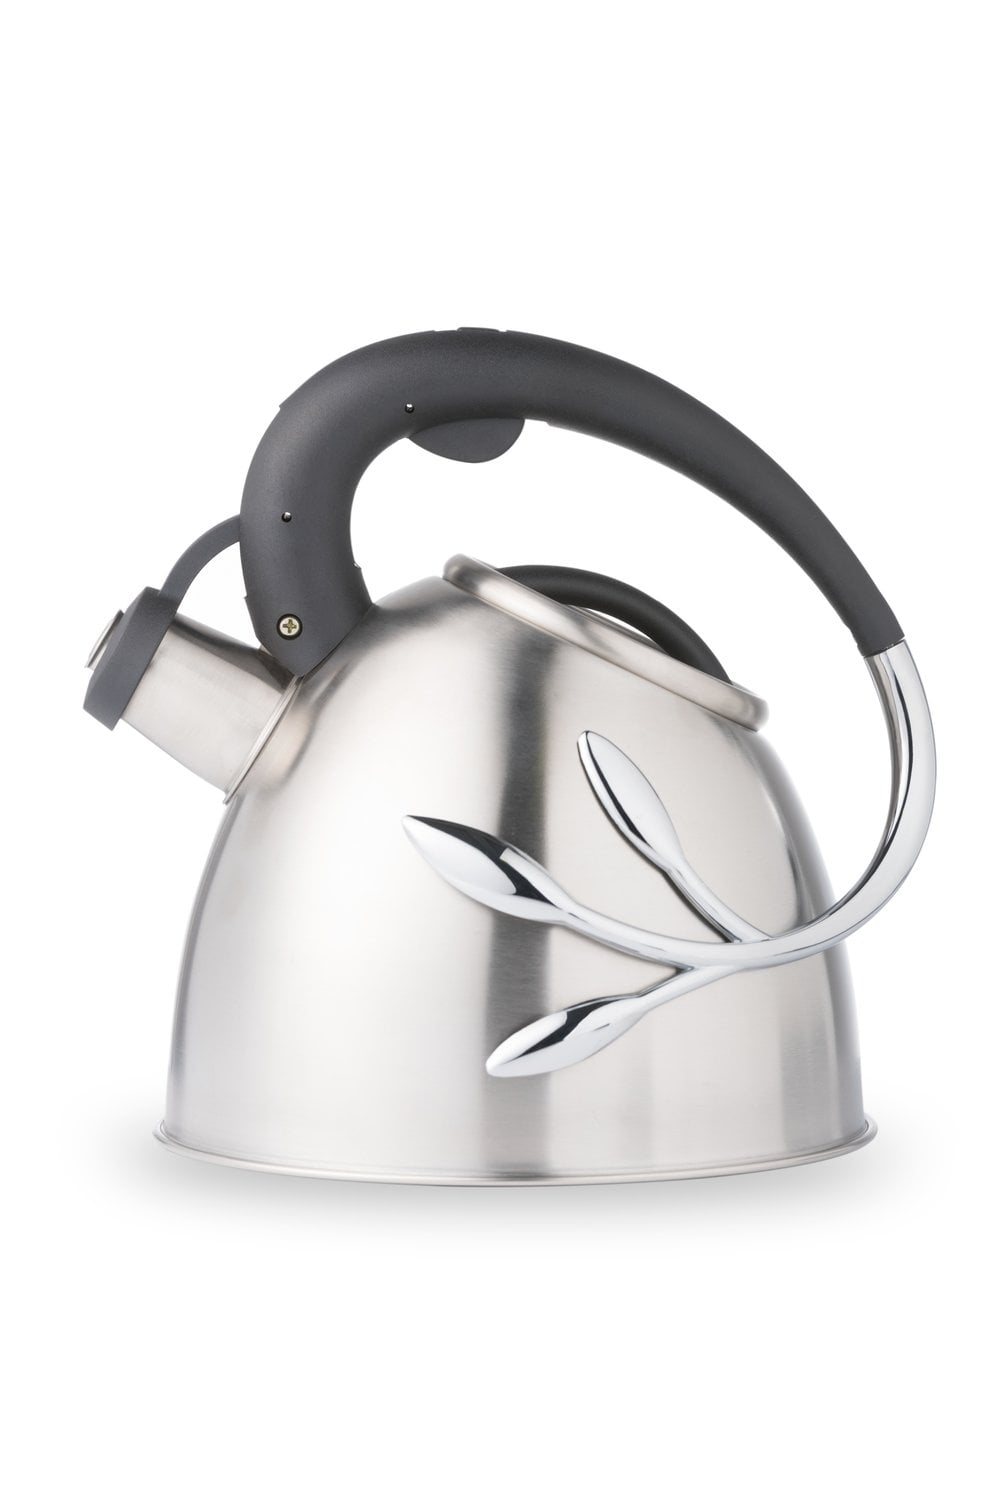 Oxo Whistling Tea Kettle, Brushed Stainless 